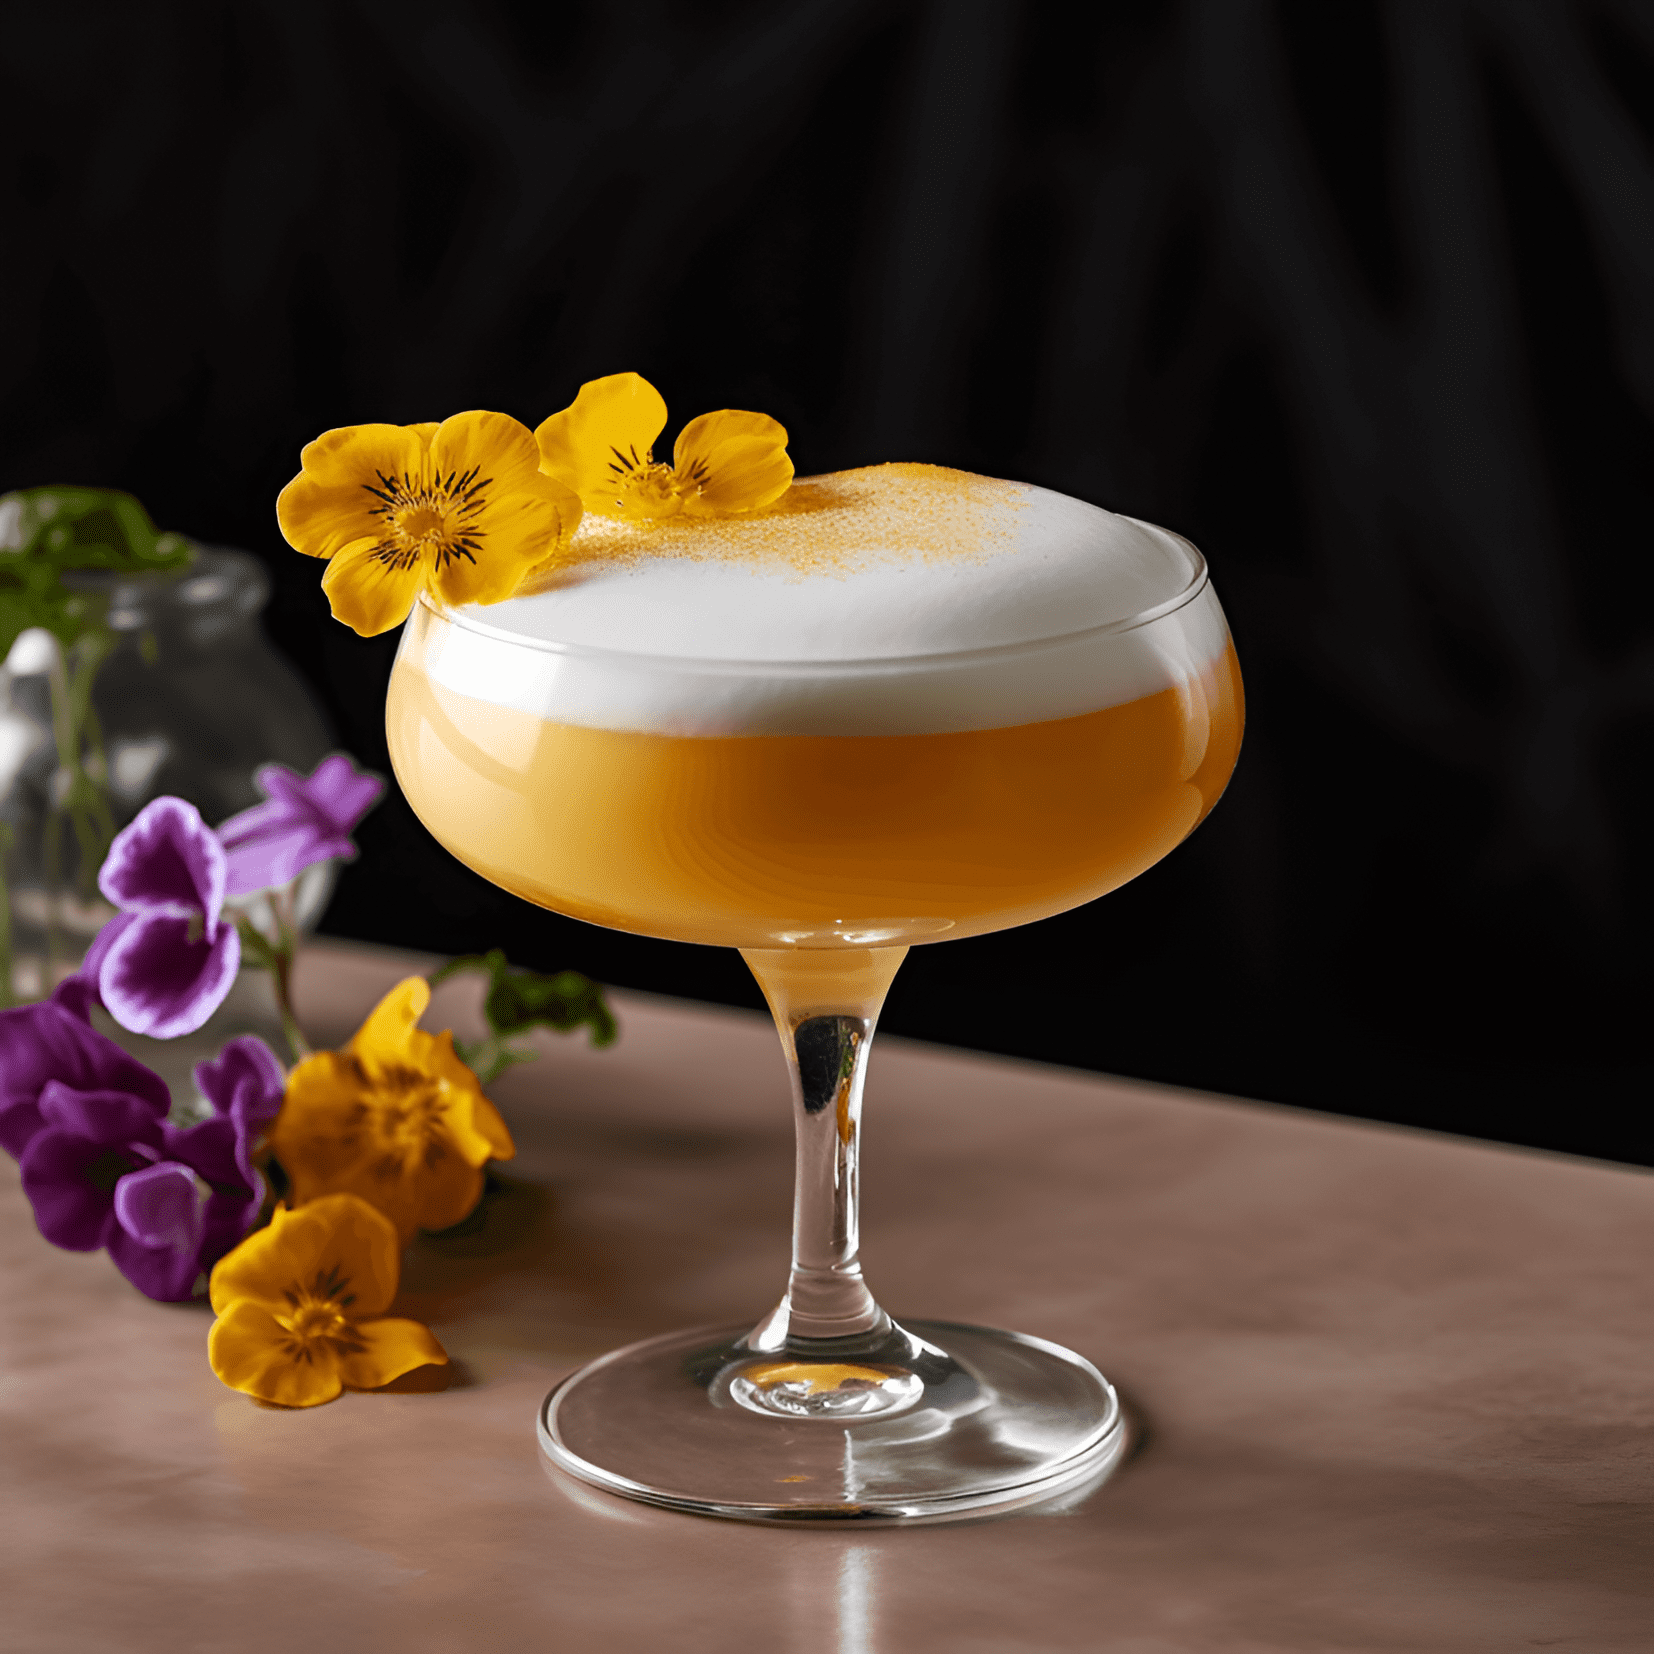 Yolanda Cocktail Recipe - The Yolanda cocktail is a delightful balance of sweet, sour, and fruity flavors. The tangy citrus notes are complemented by the rich sweetness of the liqueurs, while the hint of floral undertones adds a touch of sophistication. The finish is smooth and refreshing, with a subtle kick from the alcohol.